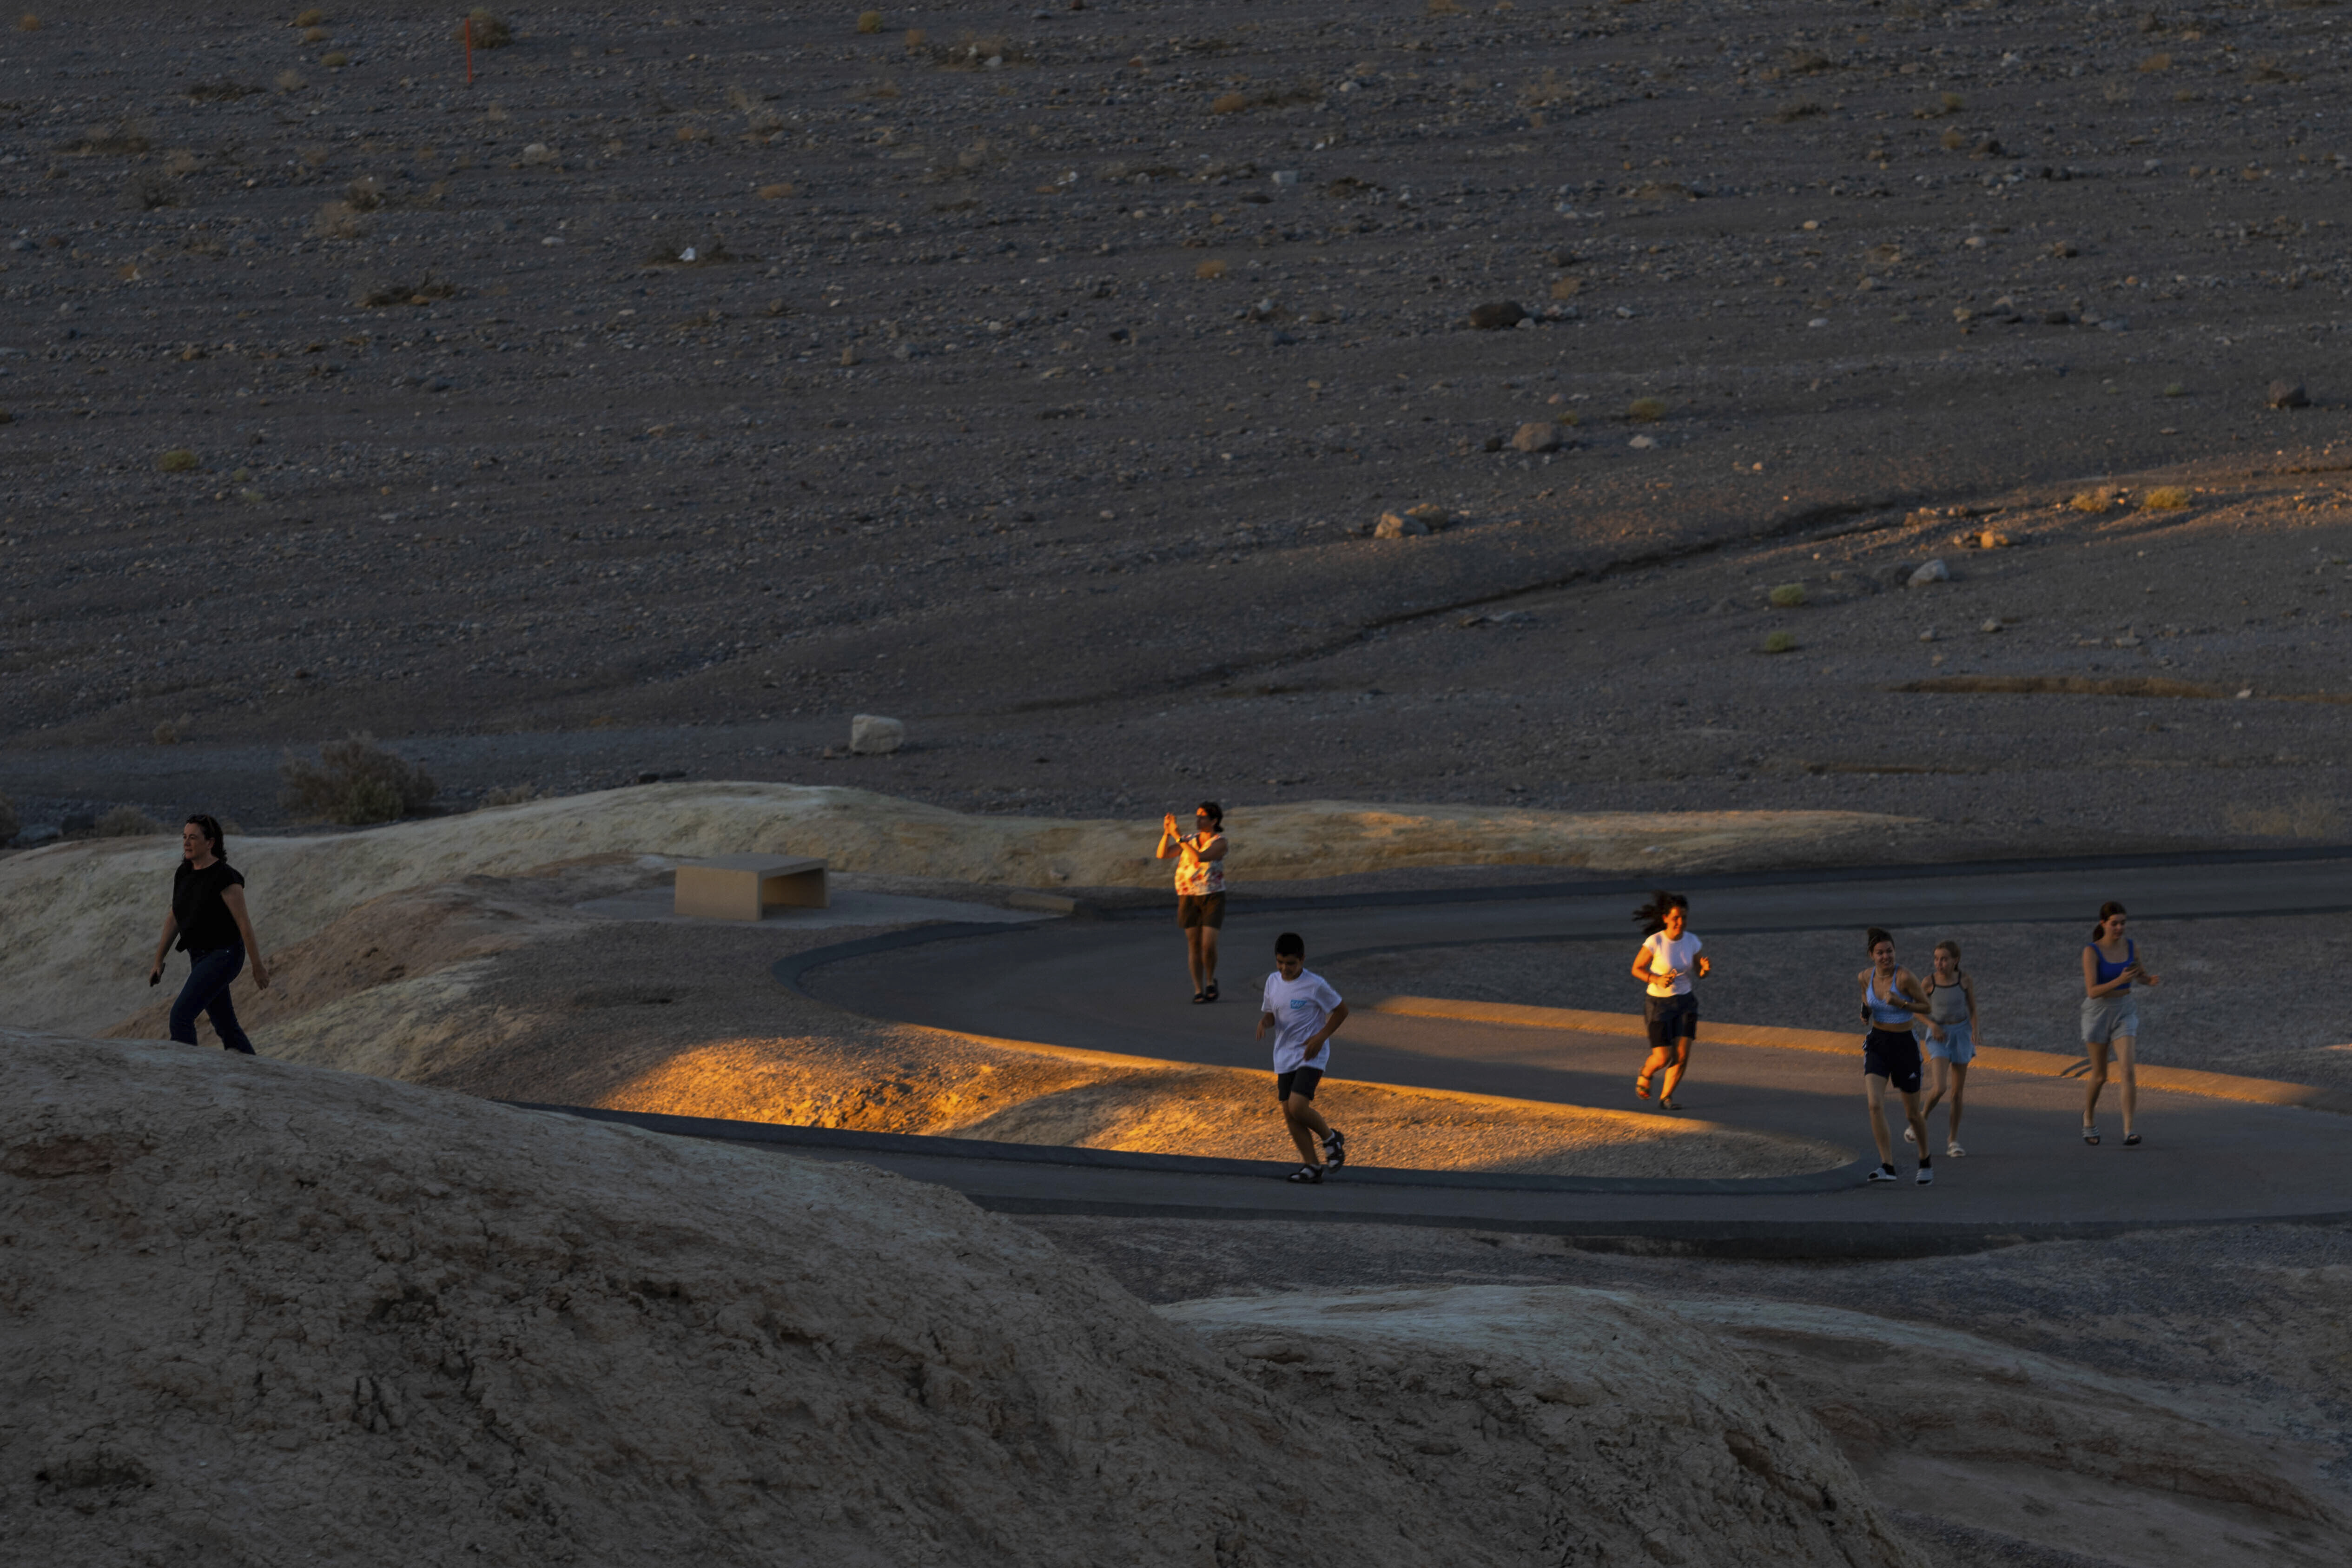 Heat wave: Death Valley visitors drawn to the hottest spot on